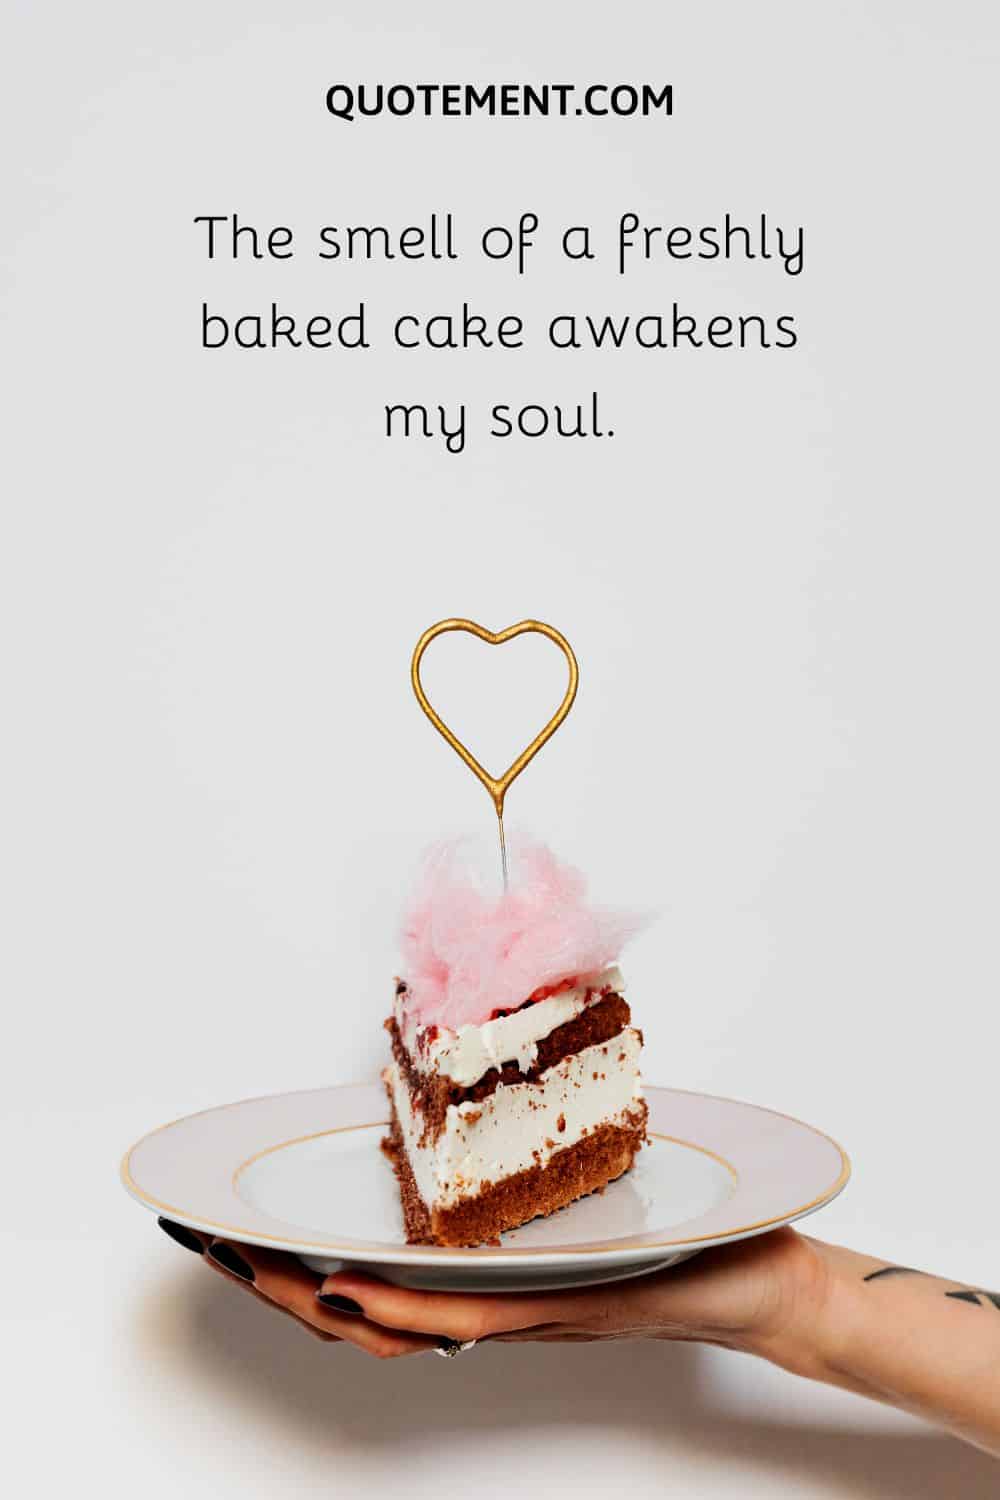 The smell of a freshly baked cake awakens my soul